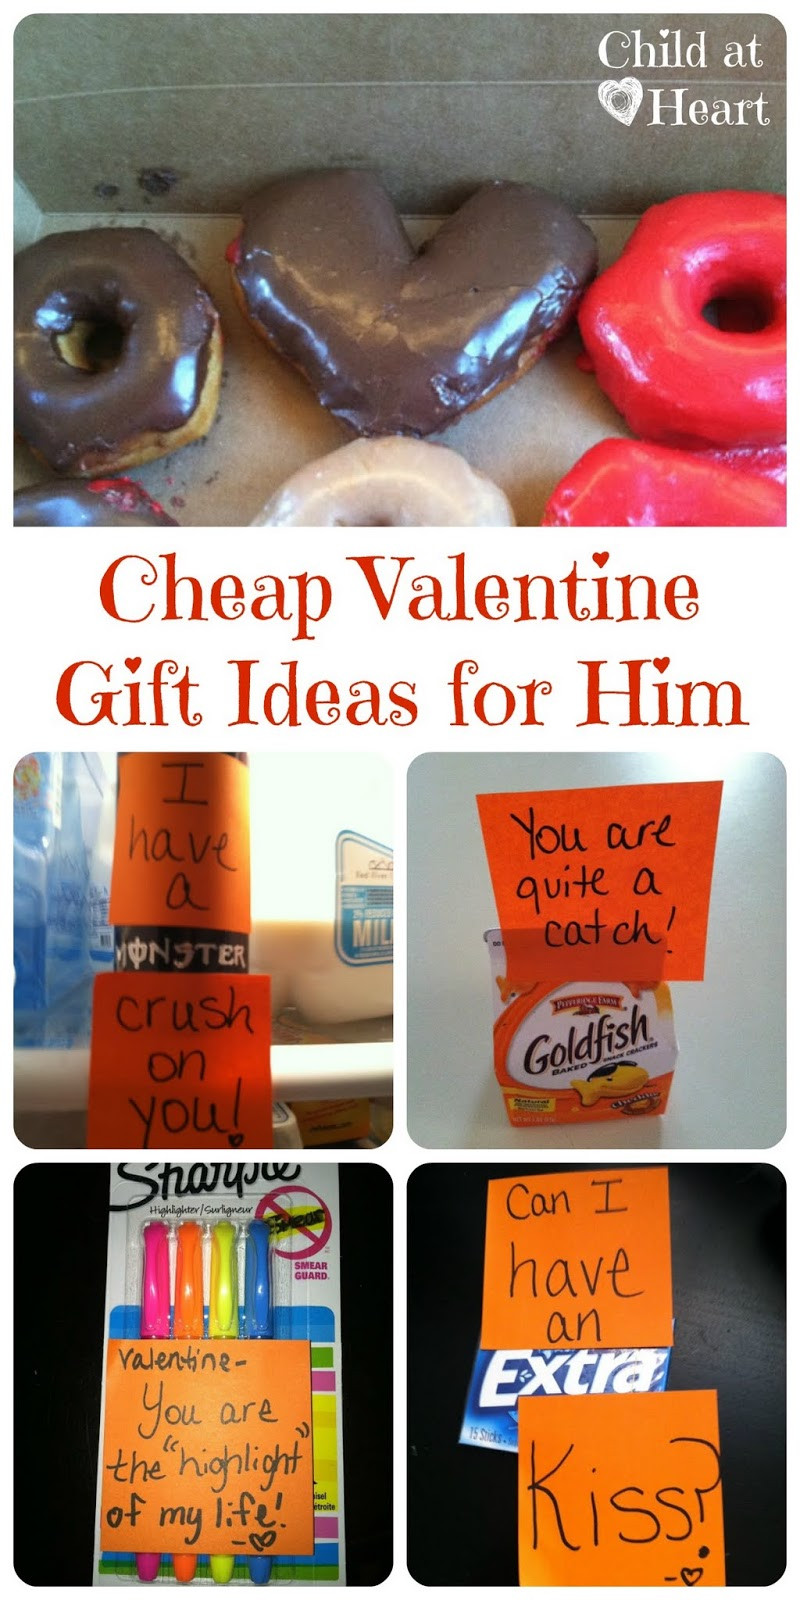 Gift Ideas For Him Valentines
 Cheap Valentine Gift Ideas for Him Child at Heart Blog